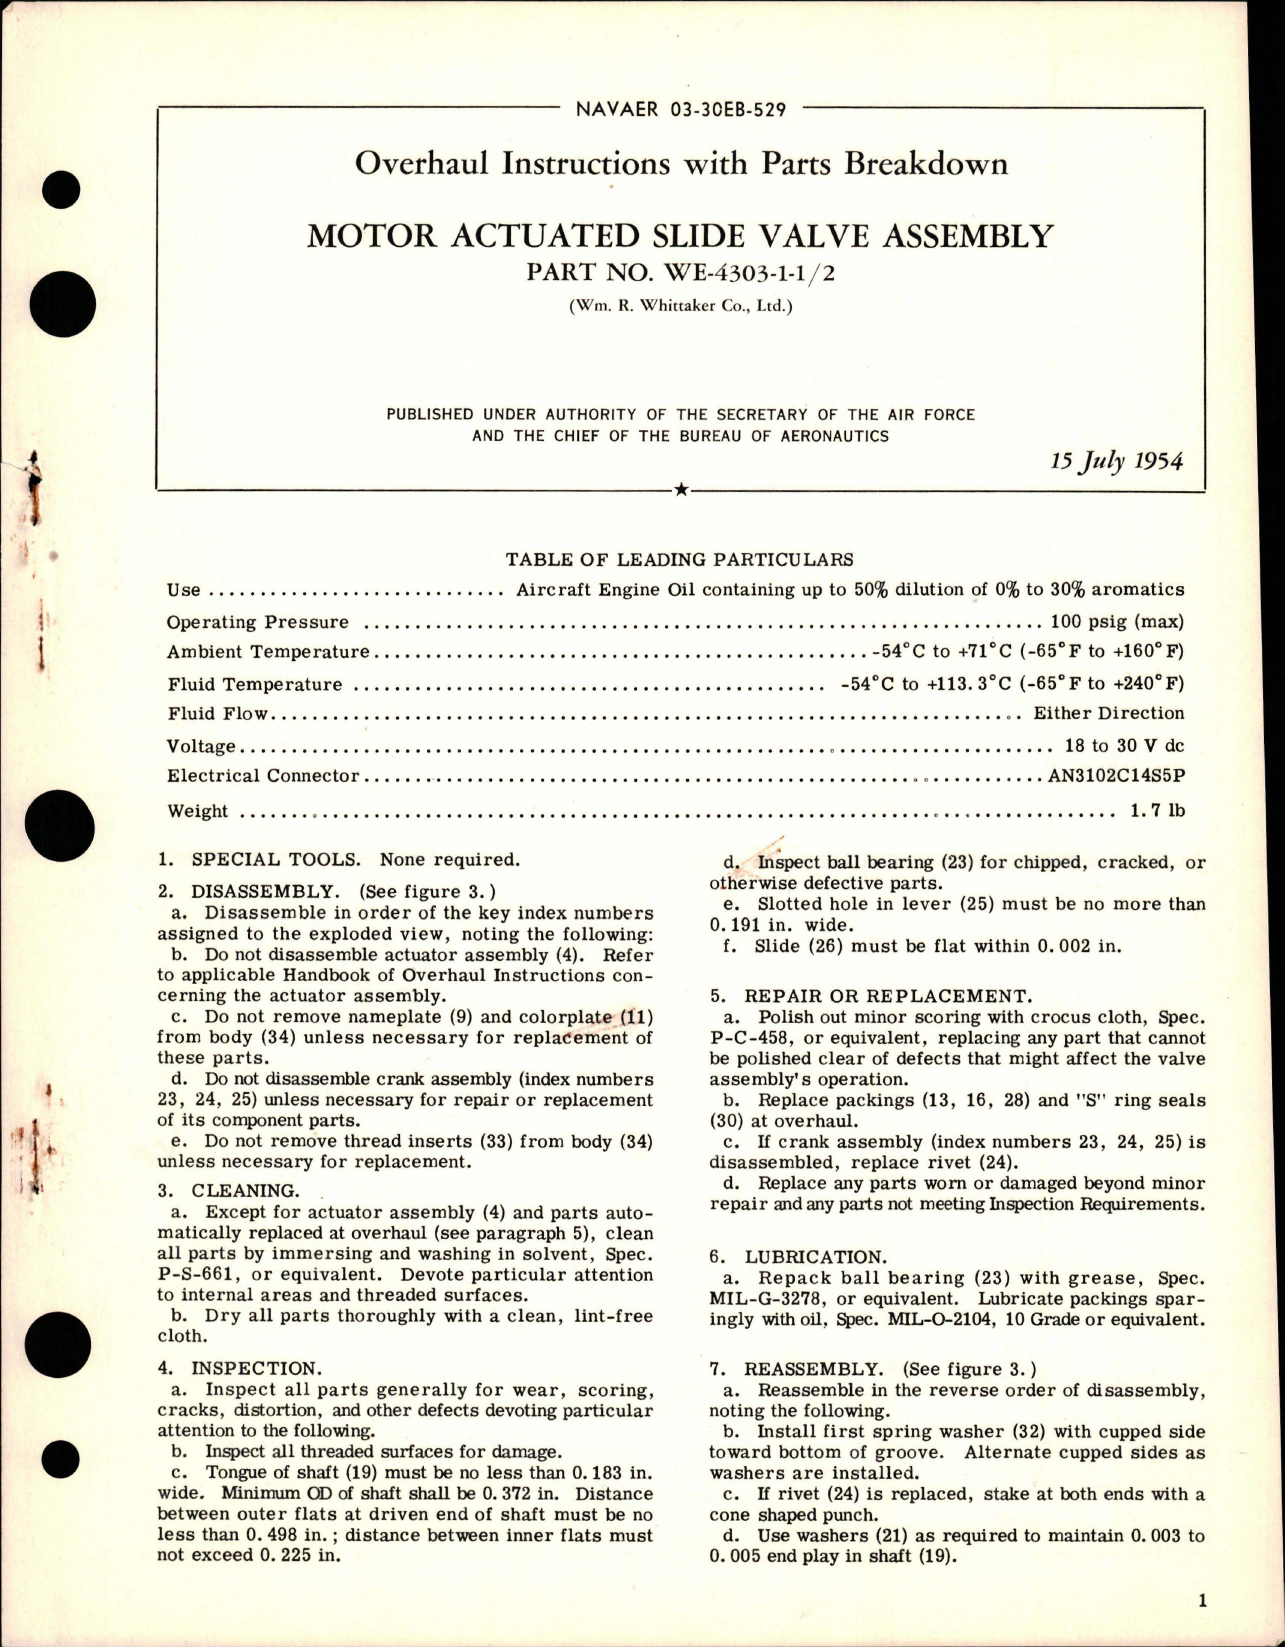 Sample page 1 from AirCorps Library document: Overhaul Instructions with Parts for Motor Actuated Slide Valve Assembly - Part WE-4303-1 1/2 